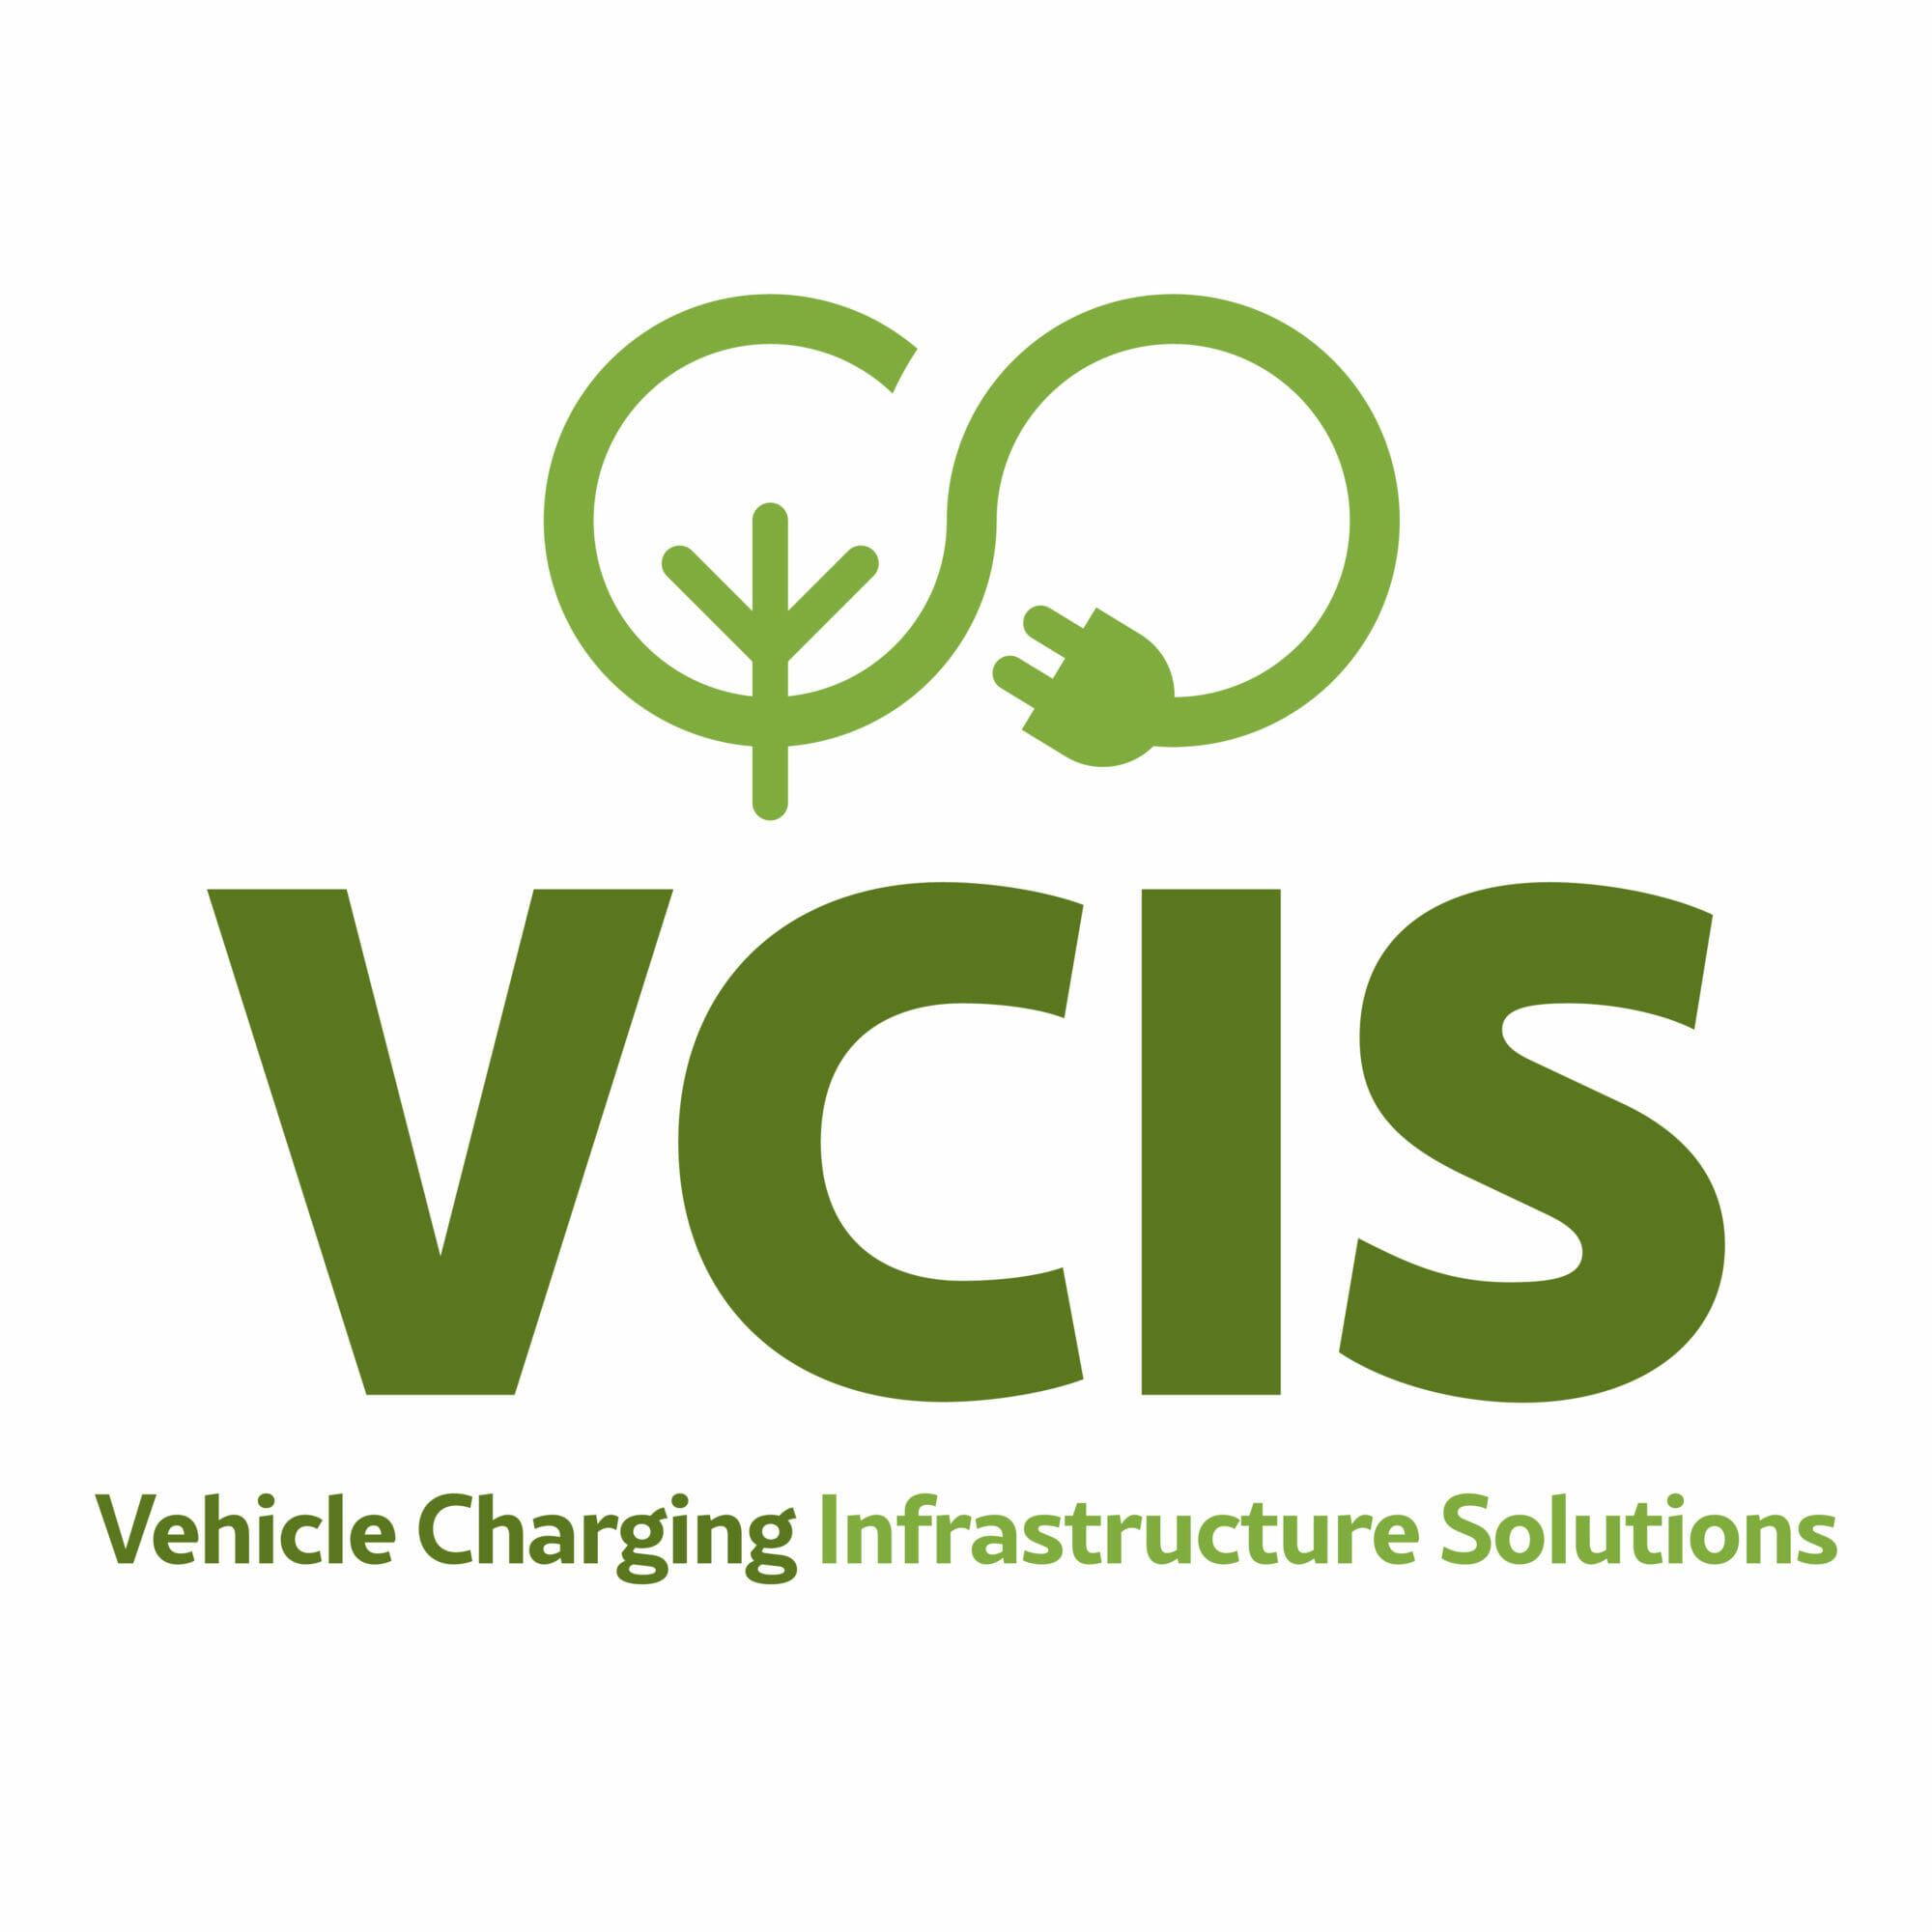 Vehicle Charging Infrastructure Solutions